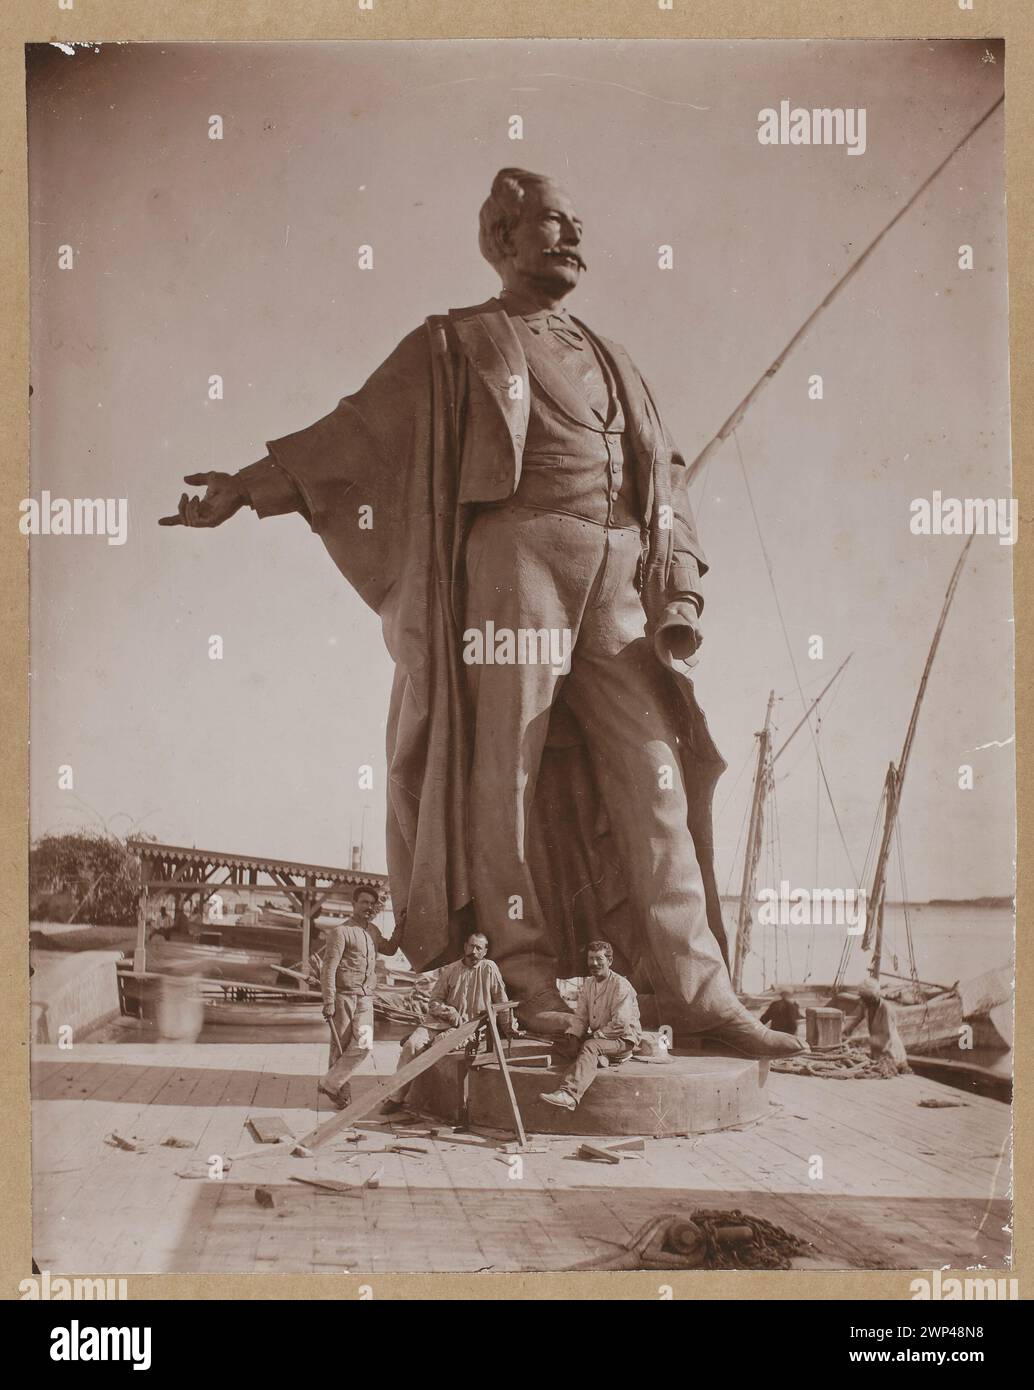 Ferdinand de Lesseps (1805-1894), D Emmanuel Frémiet (1824-1910), prepared for the position on the pedestal of the monument in the Port of Saida in Egypt-photography of the river on the port water;  1899 (1899-00-00-1899-00-00);Egypt, Frémiet, Emmanuel (1824-1910)-reproduction, genius, Mieczysław (1853-1920)-collection, Sueski channel, Lesseps, Ferdinand DE (1805-1894), Lesseps, Ferdinand DE (1805-1894)-iconography, port Said (Egypt), Gift (provenance), monuments, ports, sculptors' studios, sculpture (artist), French sculpture Stock Photo